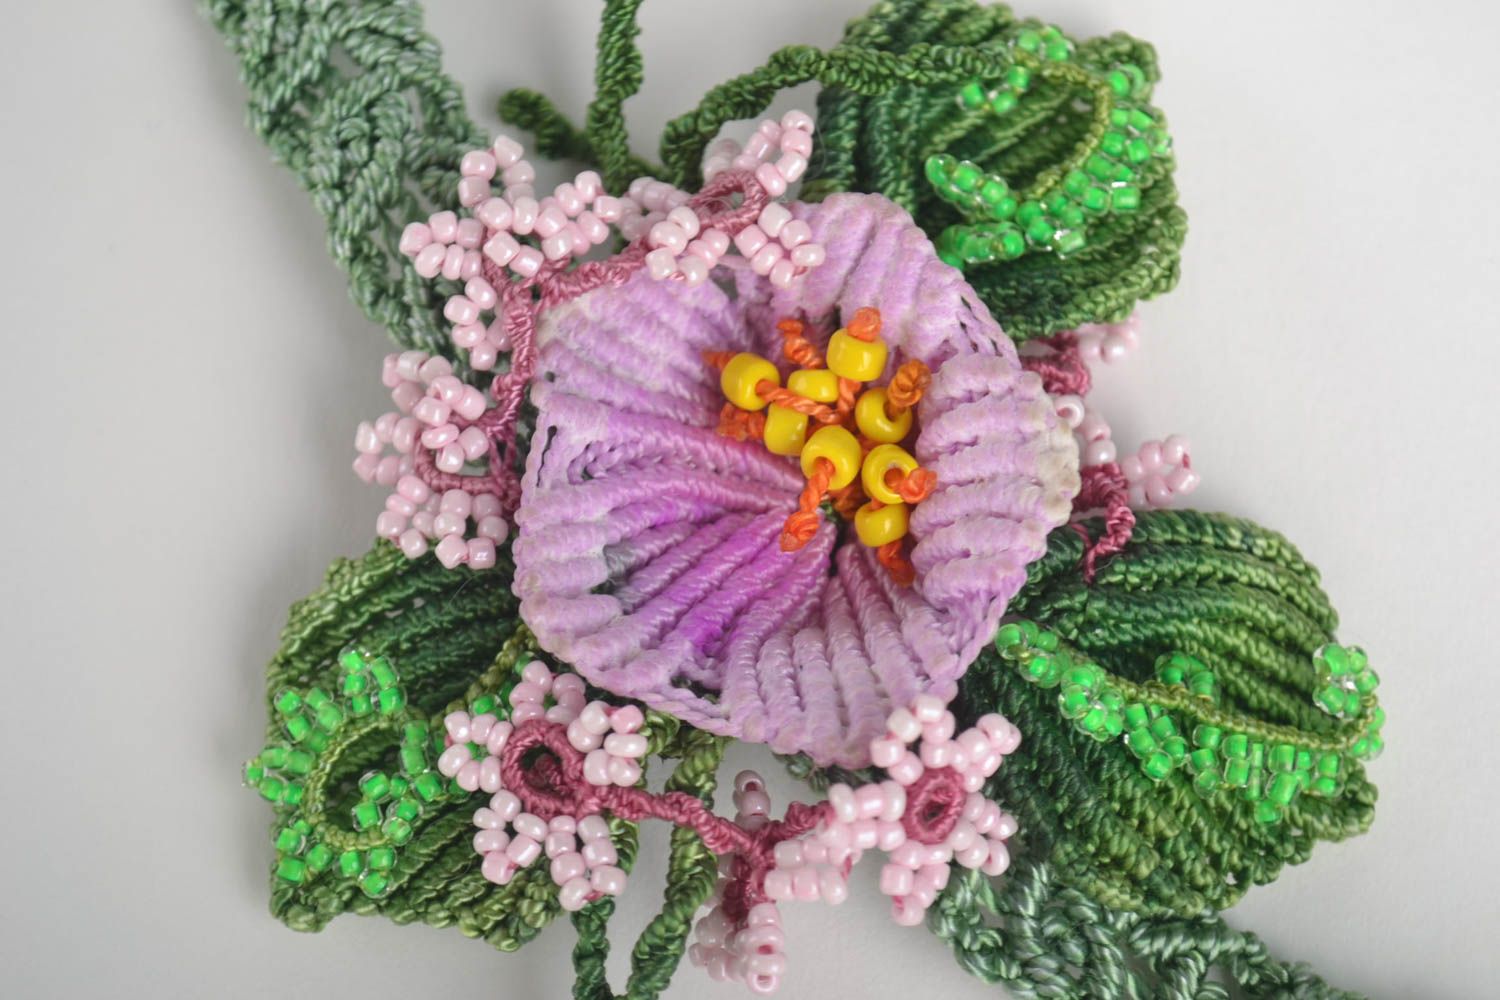 Flower jewelry handmade necklace macrame necklace fashion accessories gift ideas photo 2